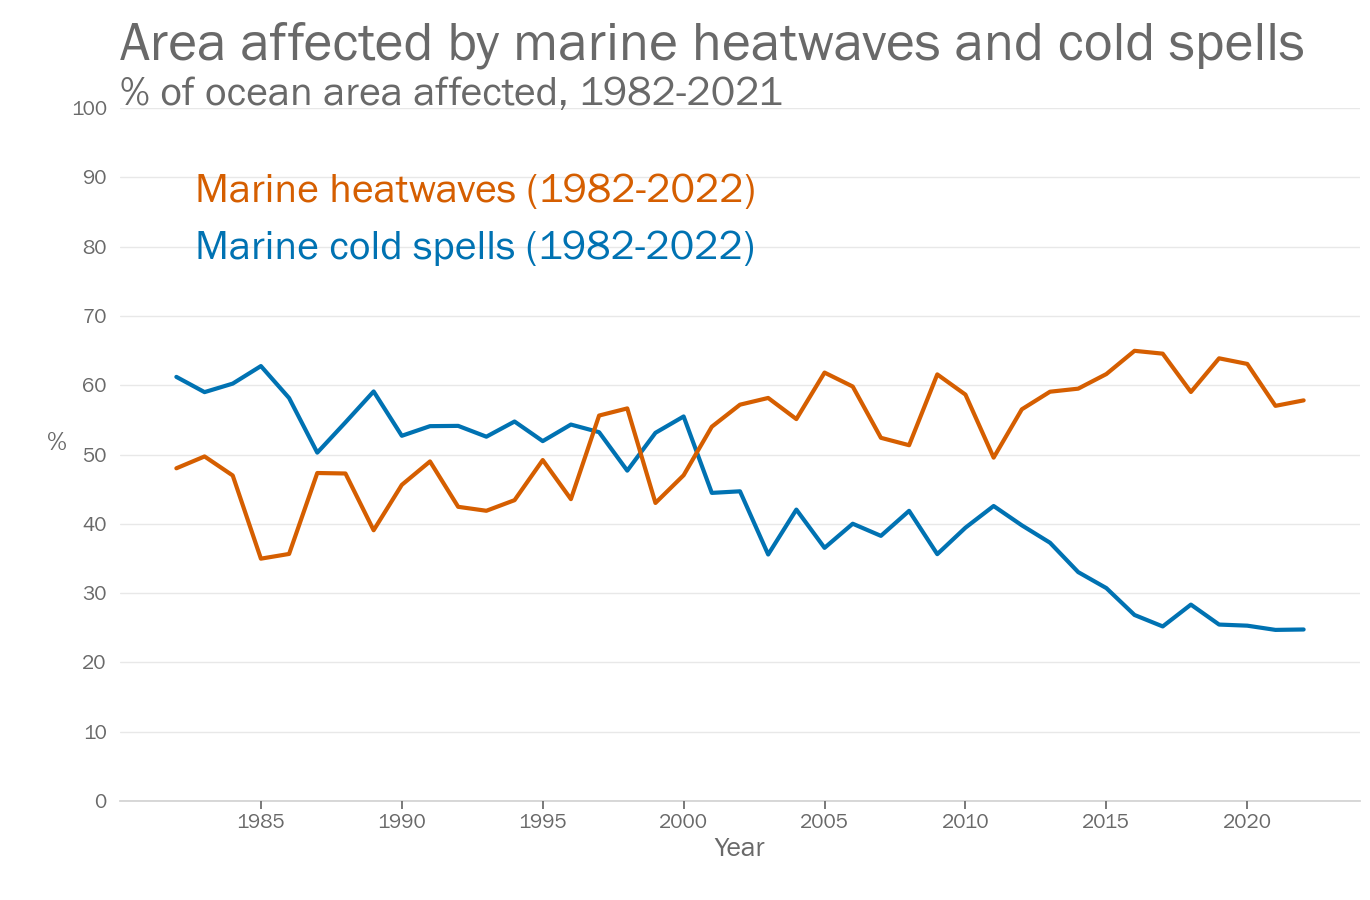 Figure showing the percentage of ocean area affected by marine heatwaves and marine cold spells each year since 1982